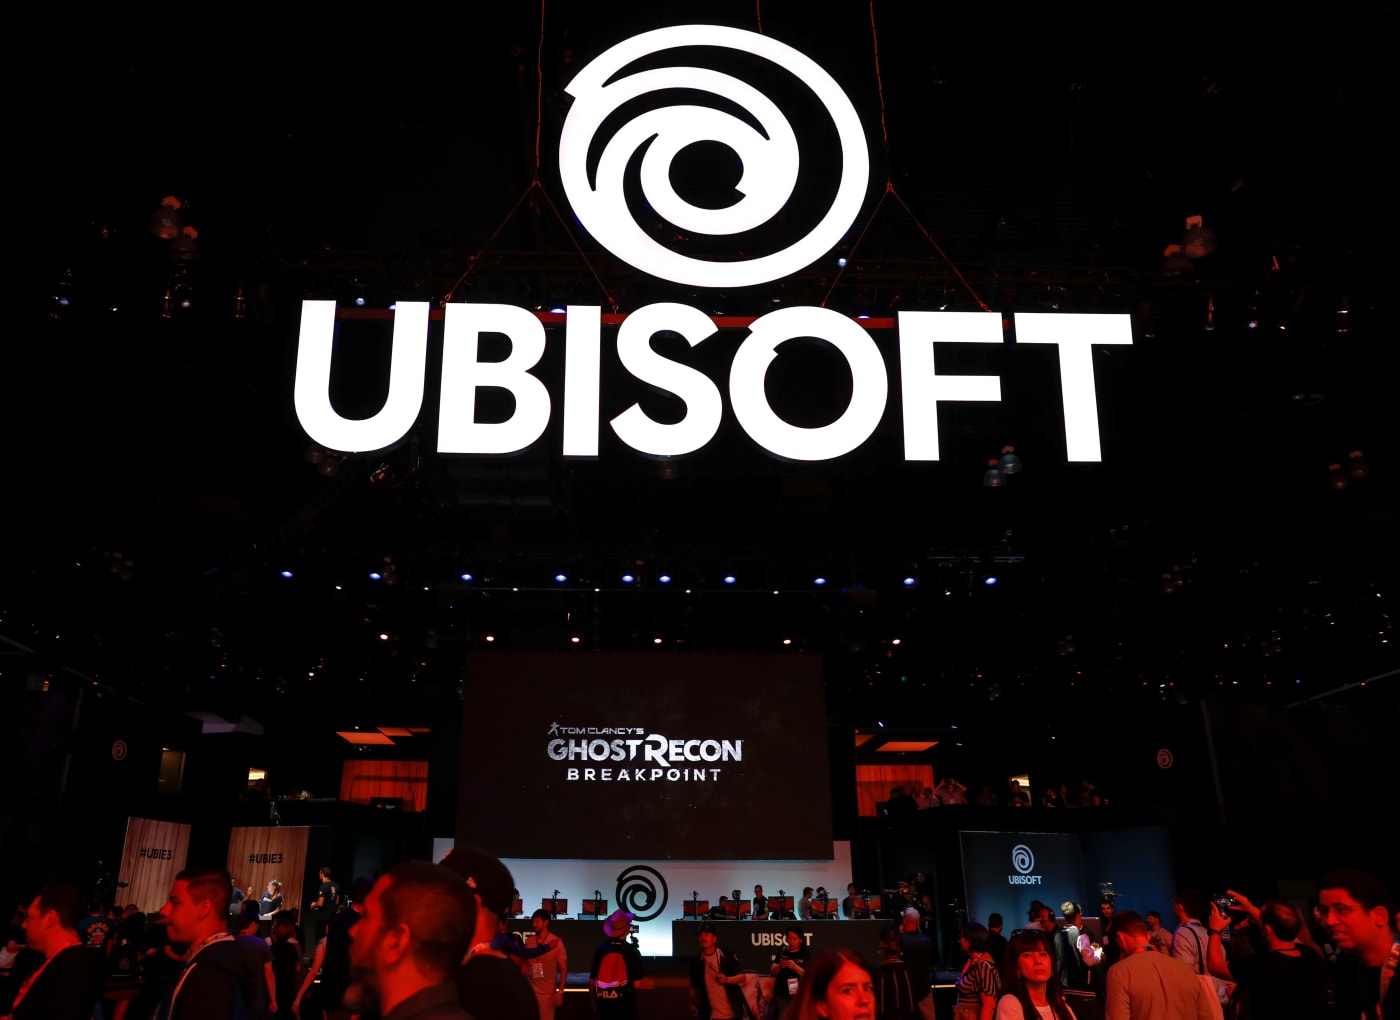 Ubisoft's planned free-to-play Division game is dead